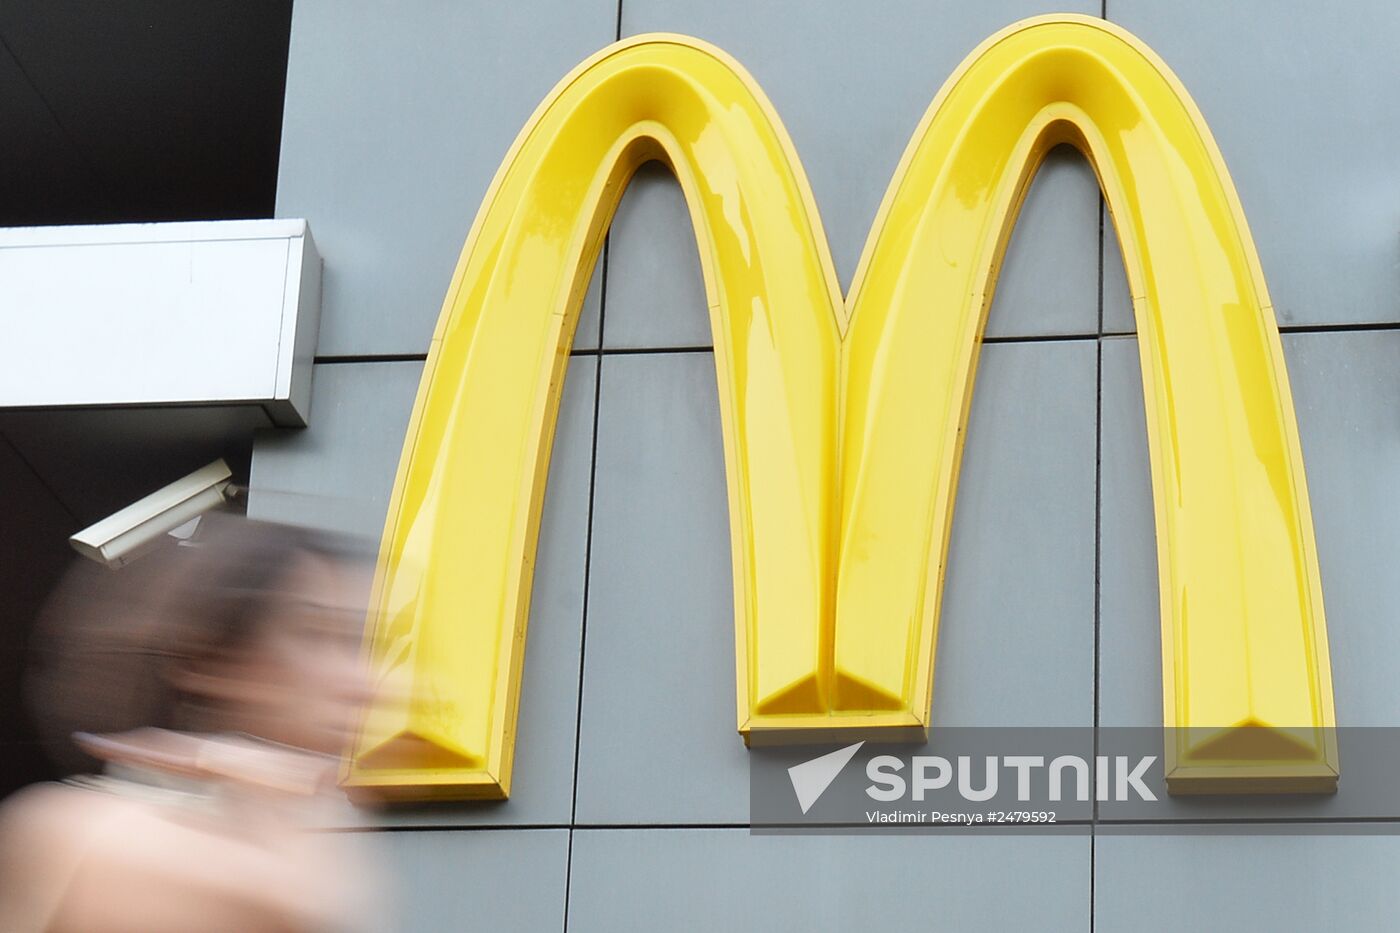 Four McDonald's restaurants suspended in Moscow